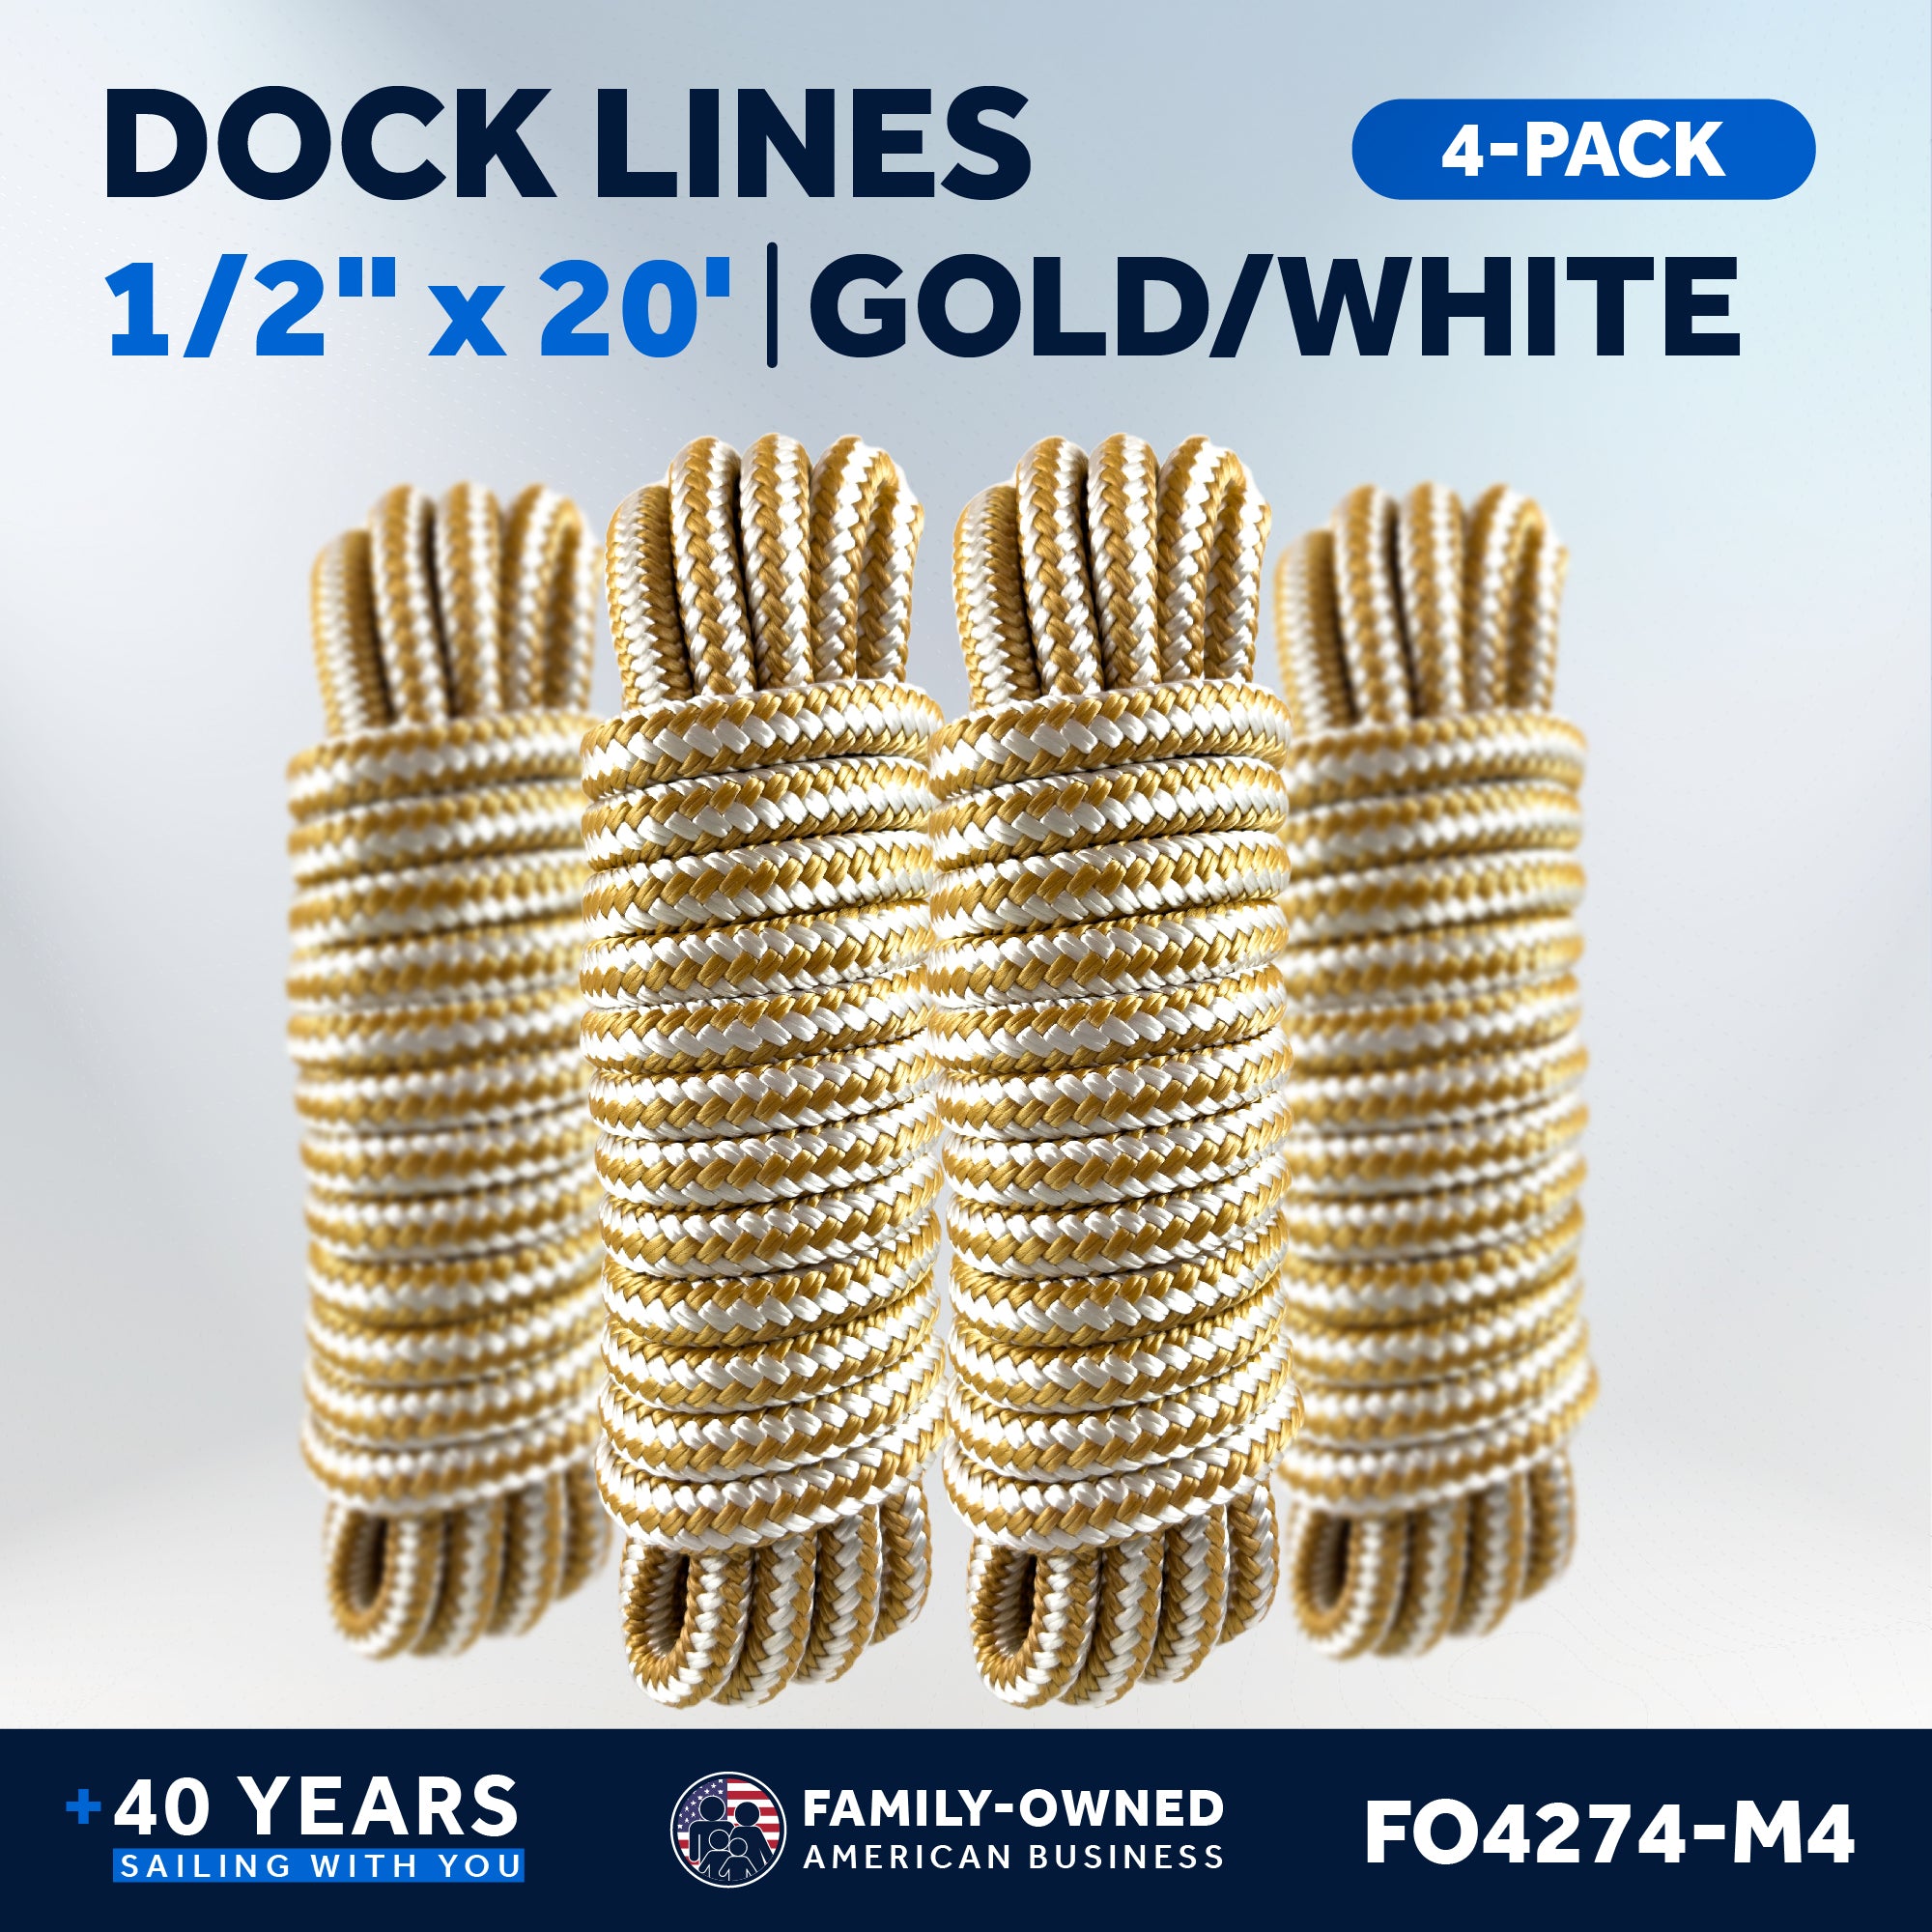 Five Oceans Marine Nylon Double Braid Dock Line 1/2 inch x 20ft, Gold/White with 12 inch Eye (4 Pack)